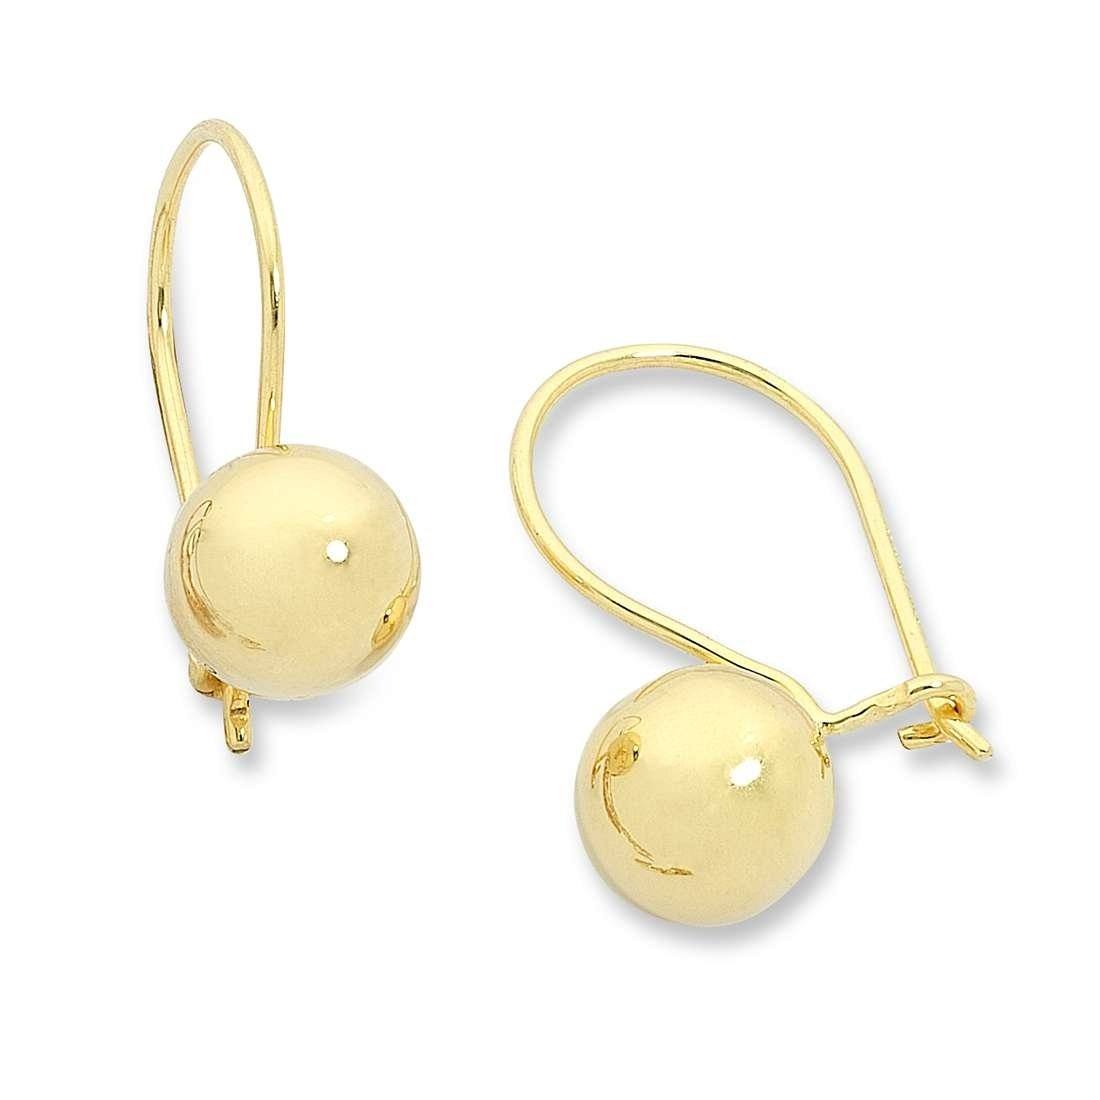 9ct Yellow Gold Silver Infused Euro Ball Earrings 9.5mm Earrings Bevilles 